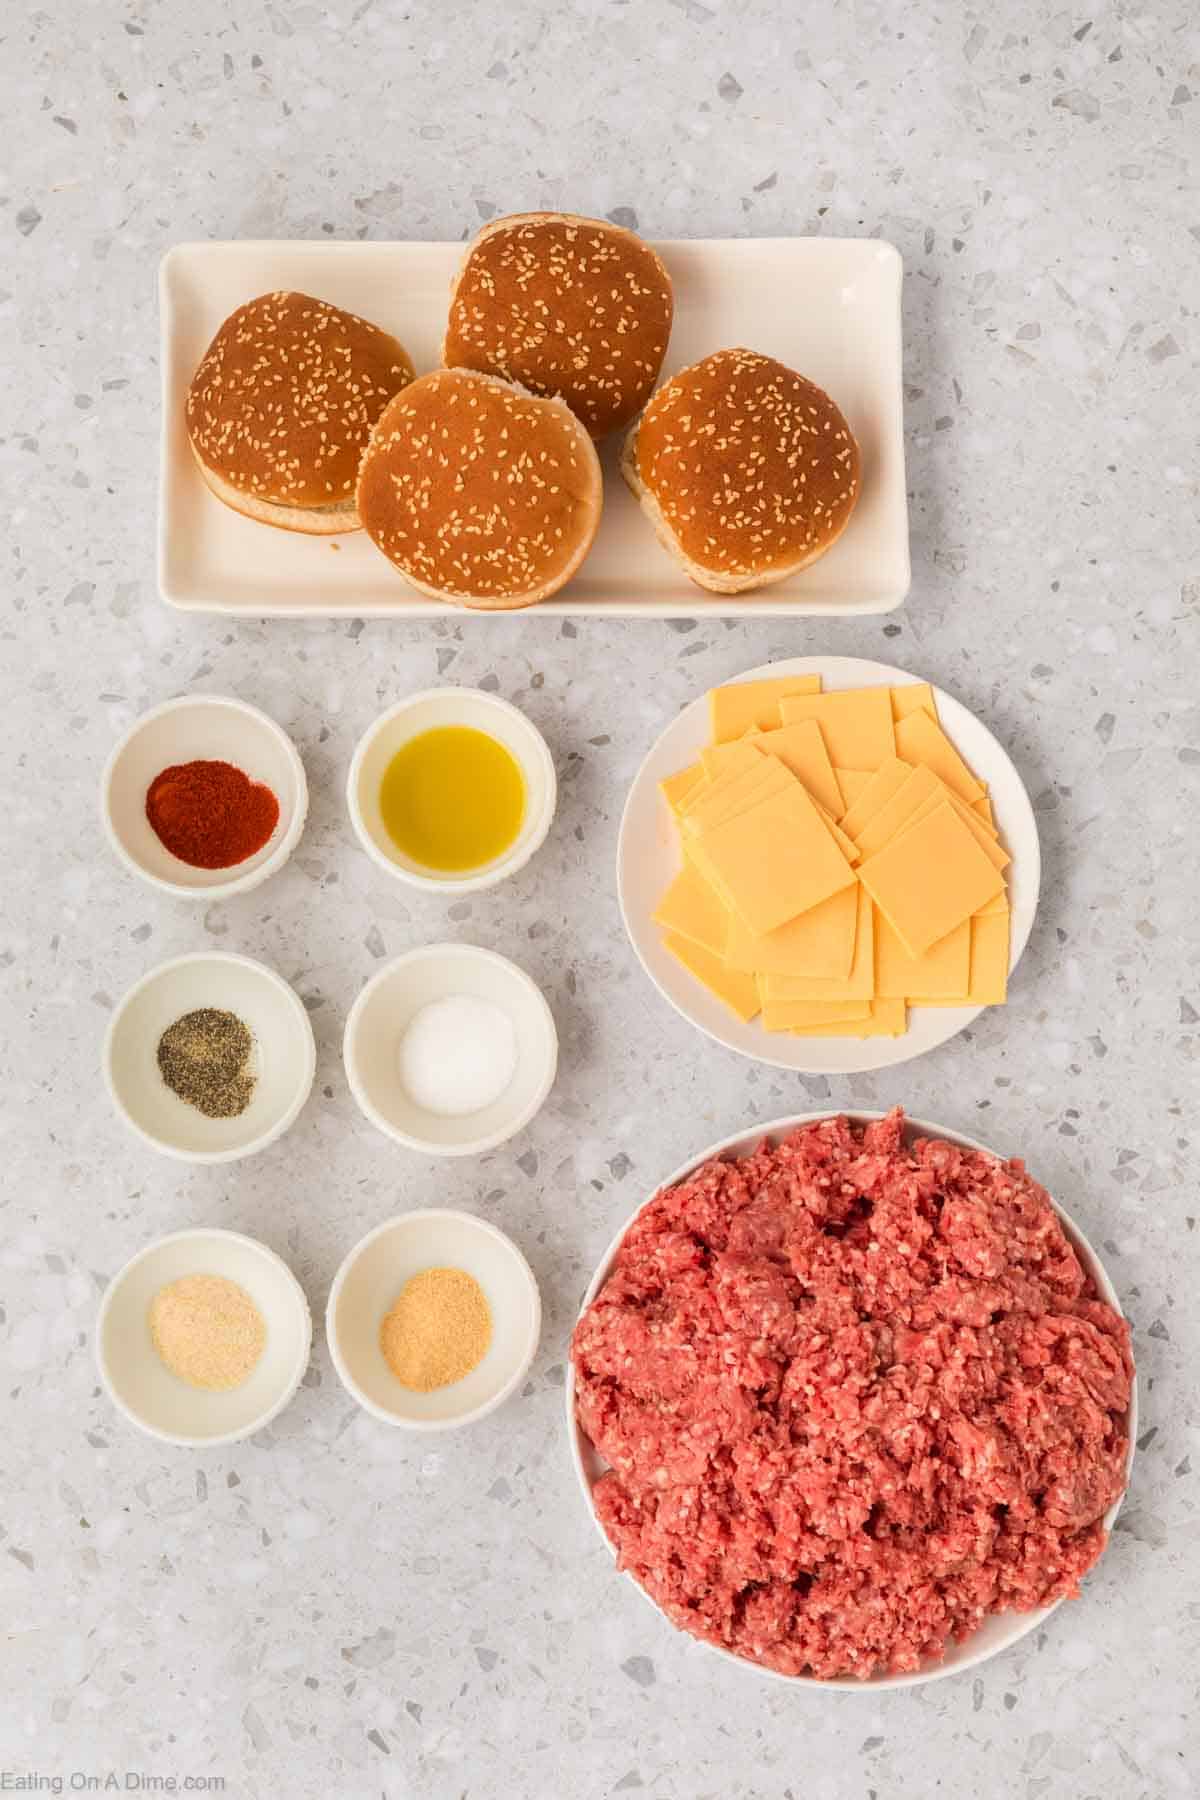 Hamburger buns on a plate, with uncooked ground beef in a bowl with a plate of cheese slices and small bowls of seasoning and oil